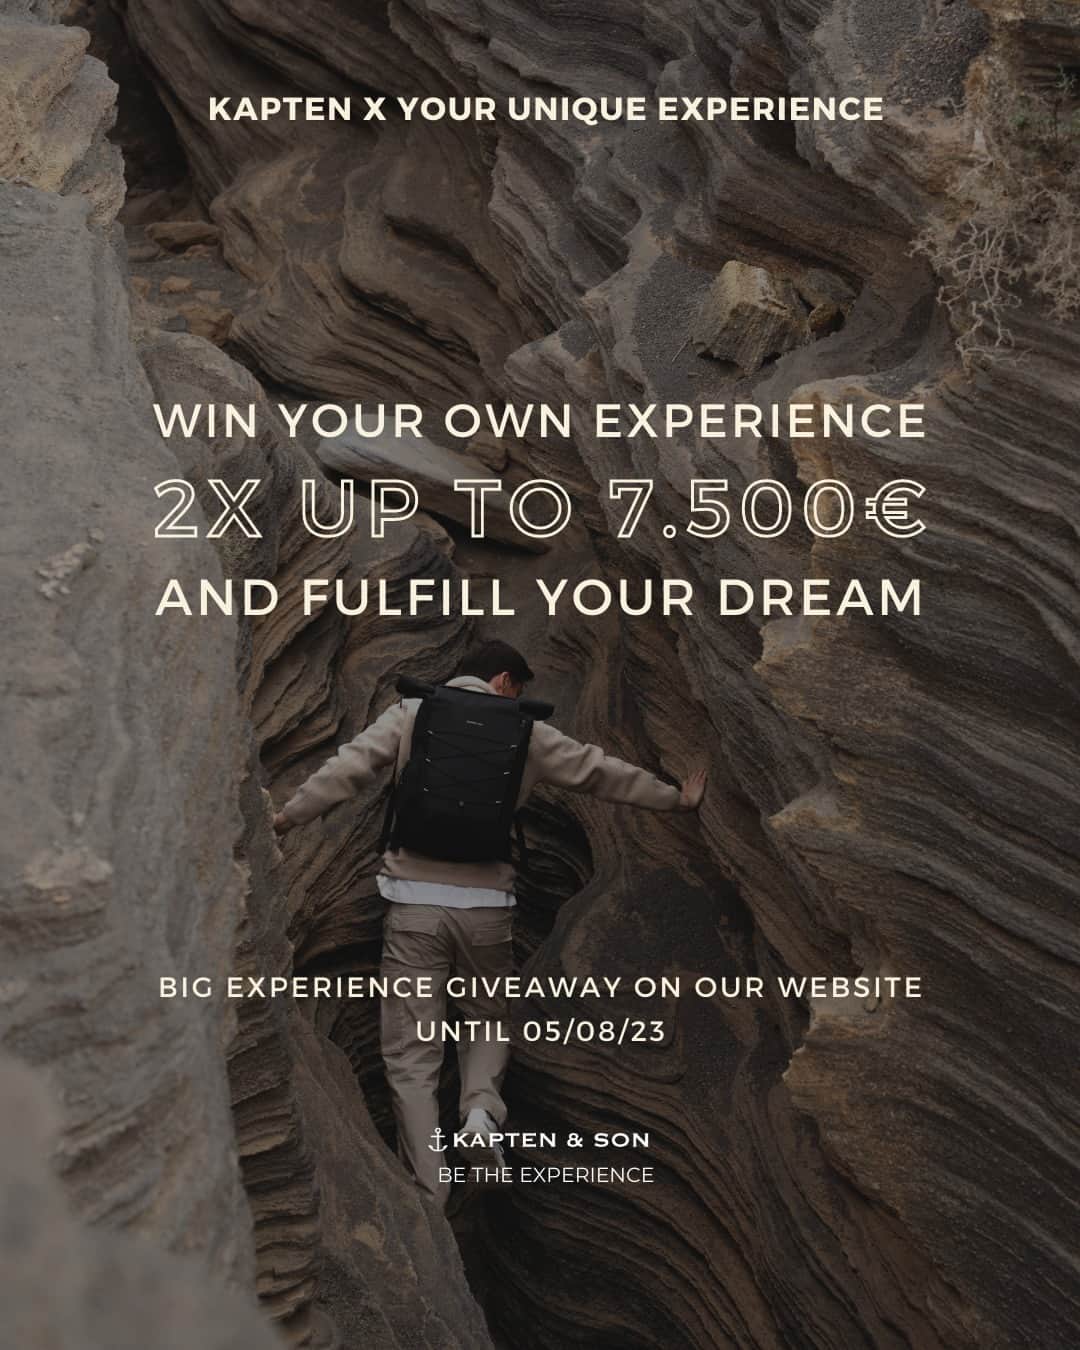 Kapten & Sonさんのインスタグラム写真 - (Kapten & SonInstagram)「WIN WIN WIN 💥 KAPTEN x YOUR UNIQUE EXPERIENCE⁣ 2x BIG EXPERIENCE GIVEAWAY UP TO 7.500€ on our website until 05/08/2023! 🤫⁣ ⁣ Take the opportunity and WIN YOUR OWN EXPERIENCE NOW and fulfill your dream!⁣ ⁣ HOW TO TAKE PART?⁣ ⁃ Get on our Website kapten-son.com (Link in Bio!)⁣ ⁃ Click on the Giveaway page⁣ ⁃ Type in your name, mail, age, your biggest dream and your Instagram-Handle⁣ - Confirm your application on the link you receive per mail⁣ ⁣ Stay tuned and keep an eye on our Instagram channels for updates.⁣ Fingers crossed for you! 🤞⁣ ⁣ Our Giveaway ends on 05/08/2023 10AM CHEST.⁣ ⁣ Our Terms and Conditions: https://kaptenandson.zendesk.com/hc/en-gb/articles/360010604159-Terms-and-conditions-Kapten-Son-raffles⁣ ⁣ #bekapten #betheexperience #experiencetheunexpected⁣」7月26日 15時30分 - kaptenandson